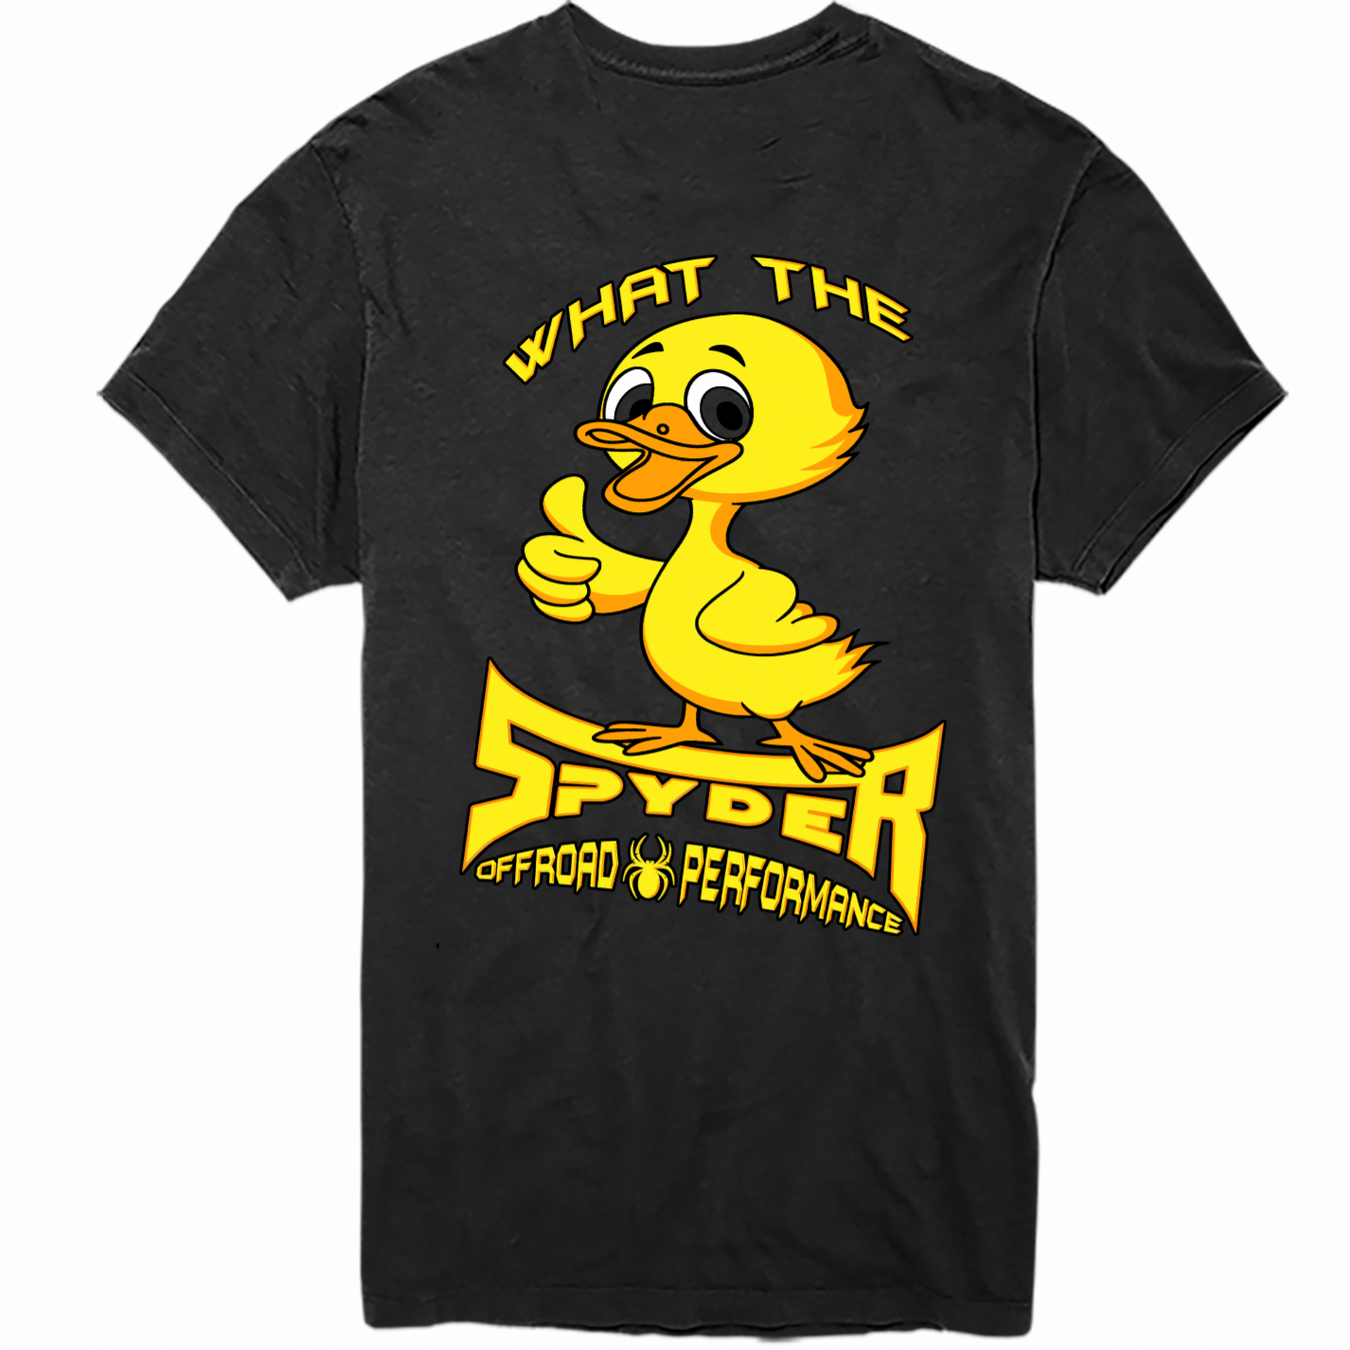 “What the Duck” Tee